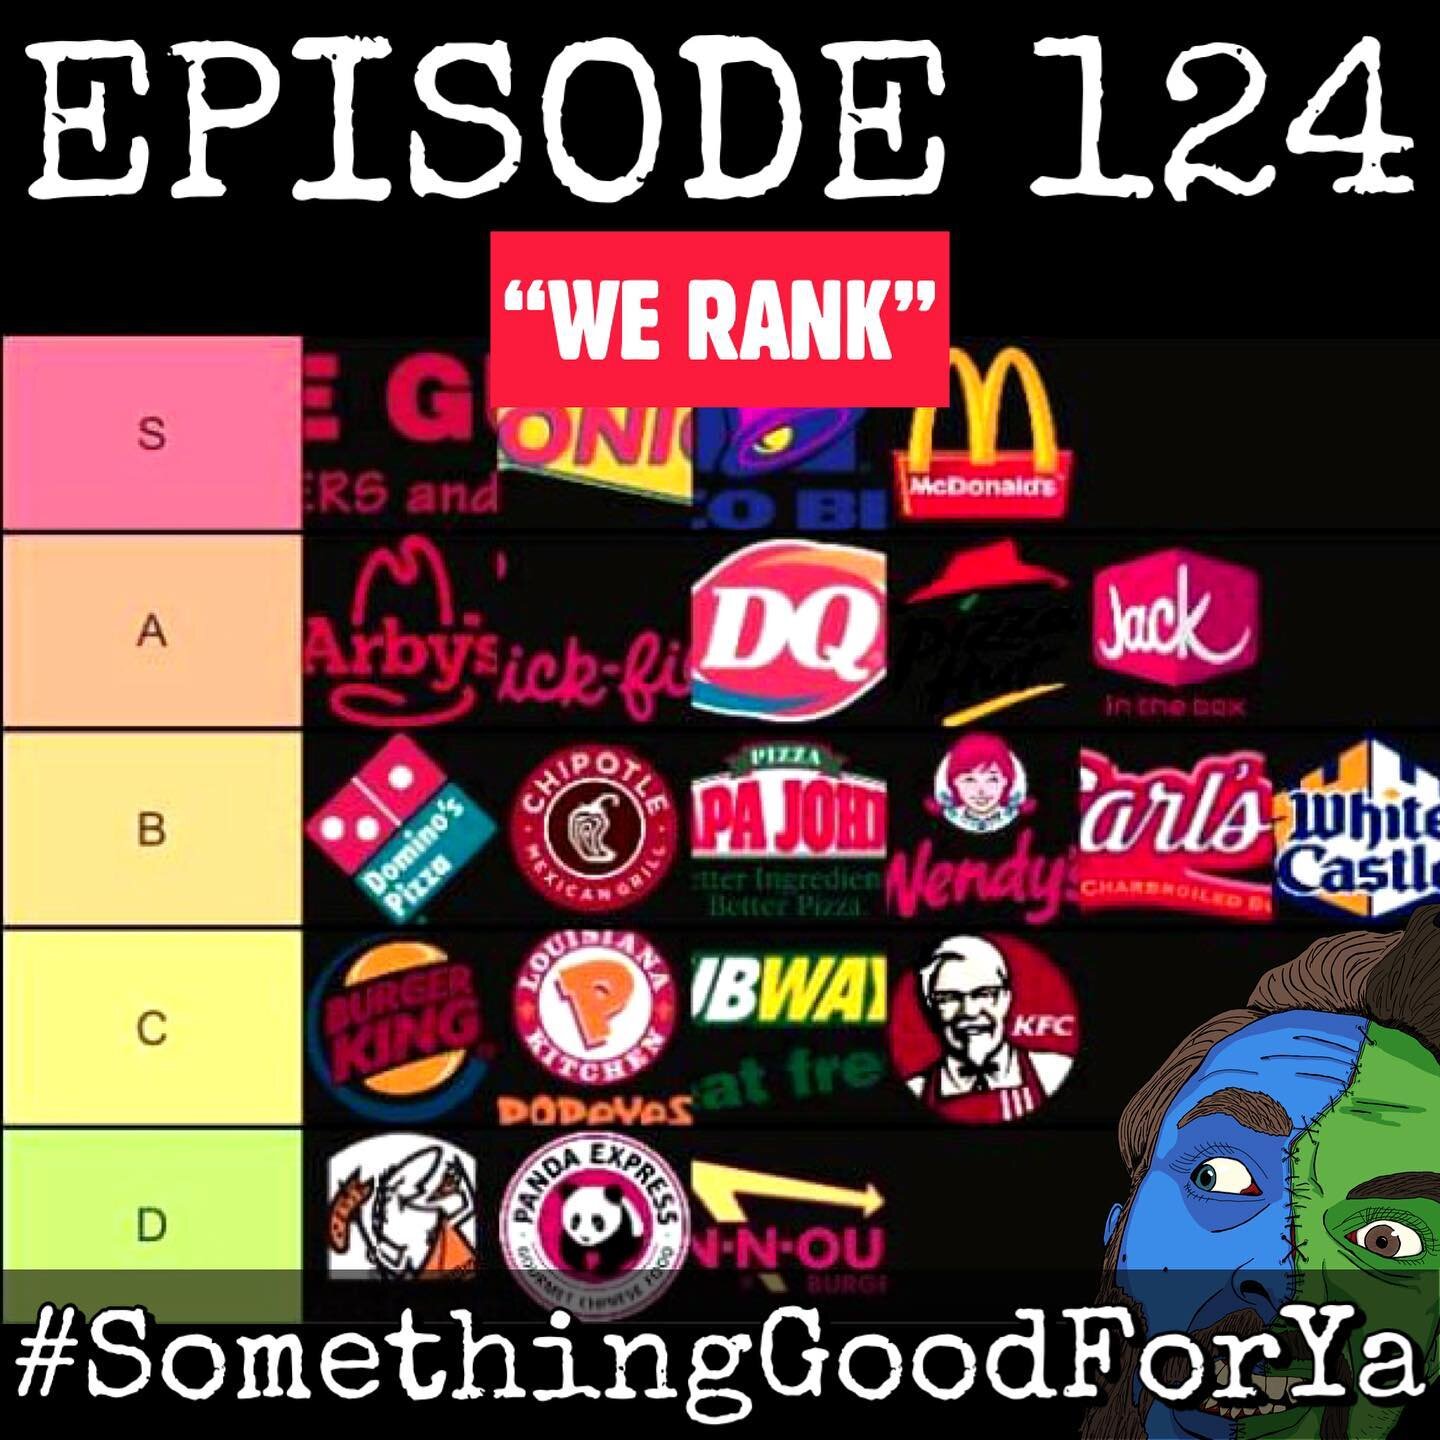 Did you see the new episode of SOMETHING GOOD FOR YA that dropped TODAY?! 😍😍 It&rsquo;s available on all your podcasting apps! ➡️ LINK IN THE BIO
🍔🌮🌯🍟
 We are back this week discussing and ranking a whole lot of things! It all started with us l